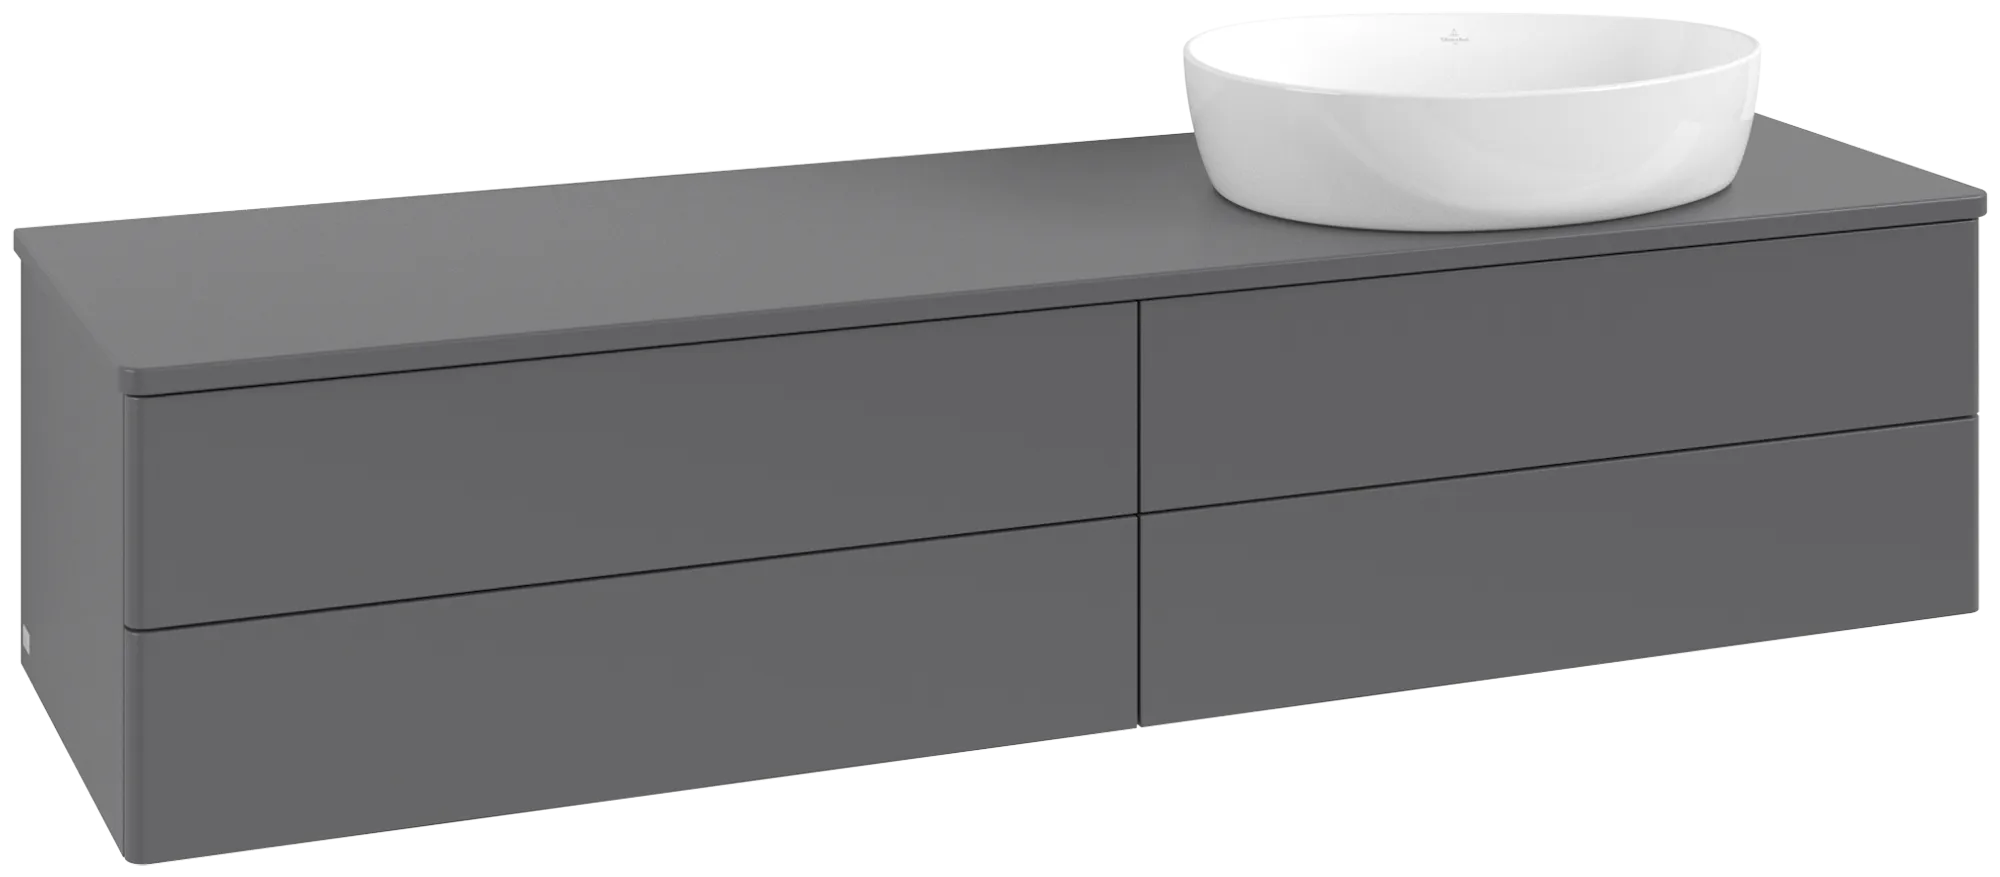 Picture of VILLEROY BOCH Antao Vanity unit, with lighting, 4 pull-out compartments, 1600 x 360 x 500 mm, Front without structure, Anthracite Matt Lacquer / Anthracite Matt Lacquer #L27050GK